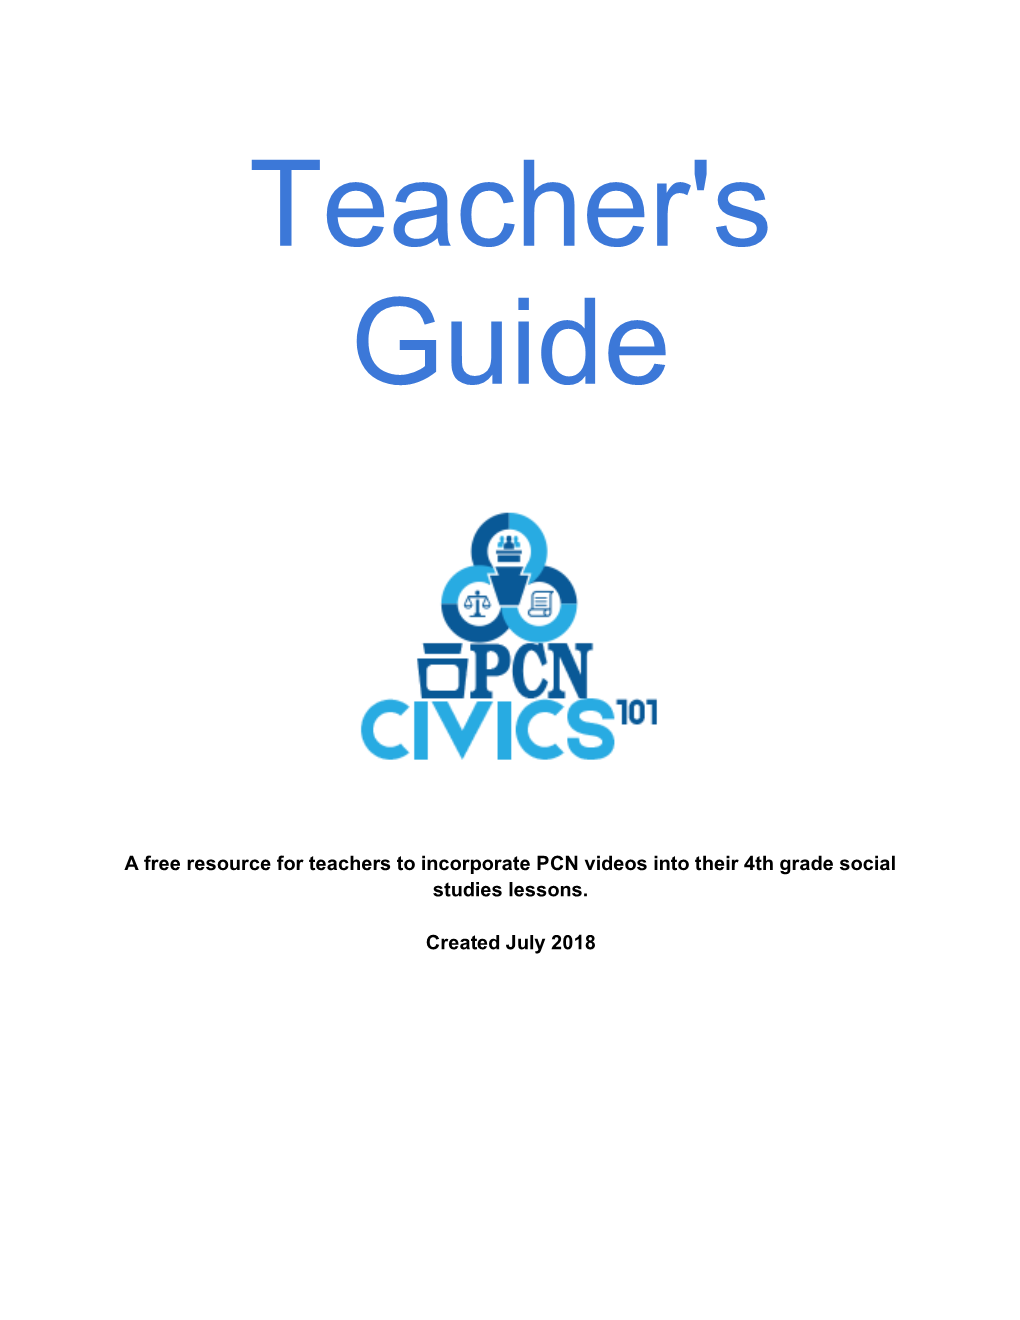 A Free Resource for Teachers to Incorporate PCN Videos Into Their 4Th Grade Social Studies Lessons